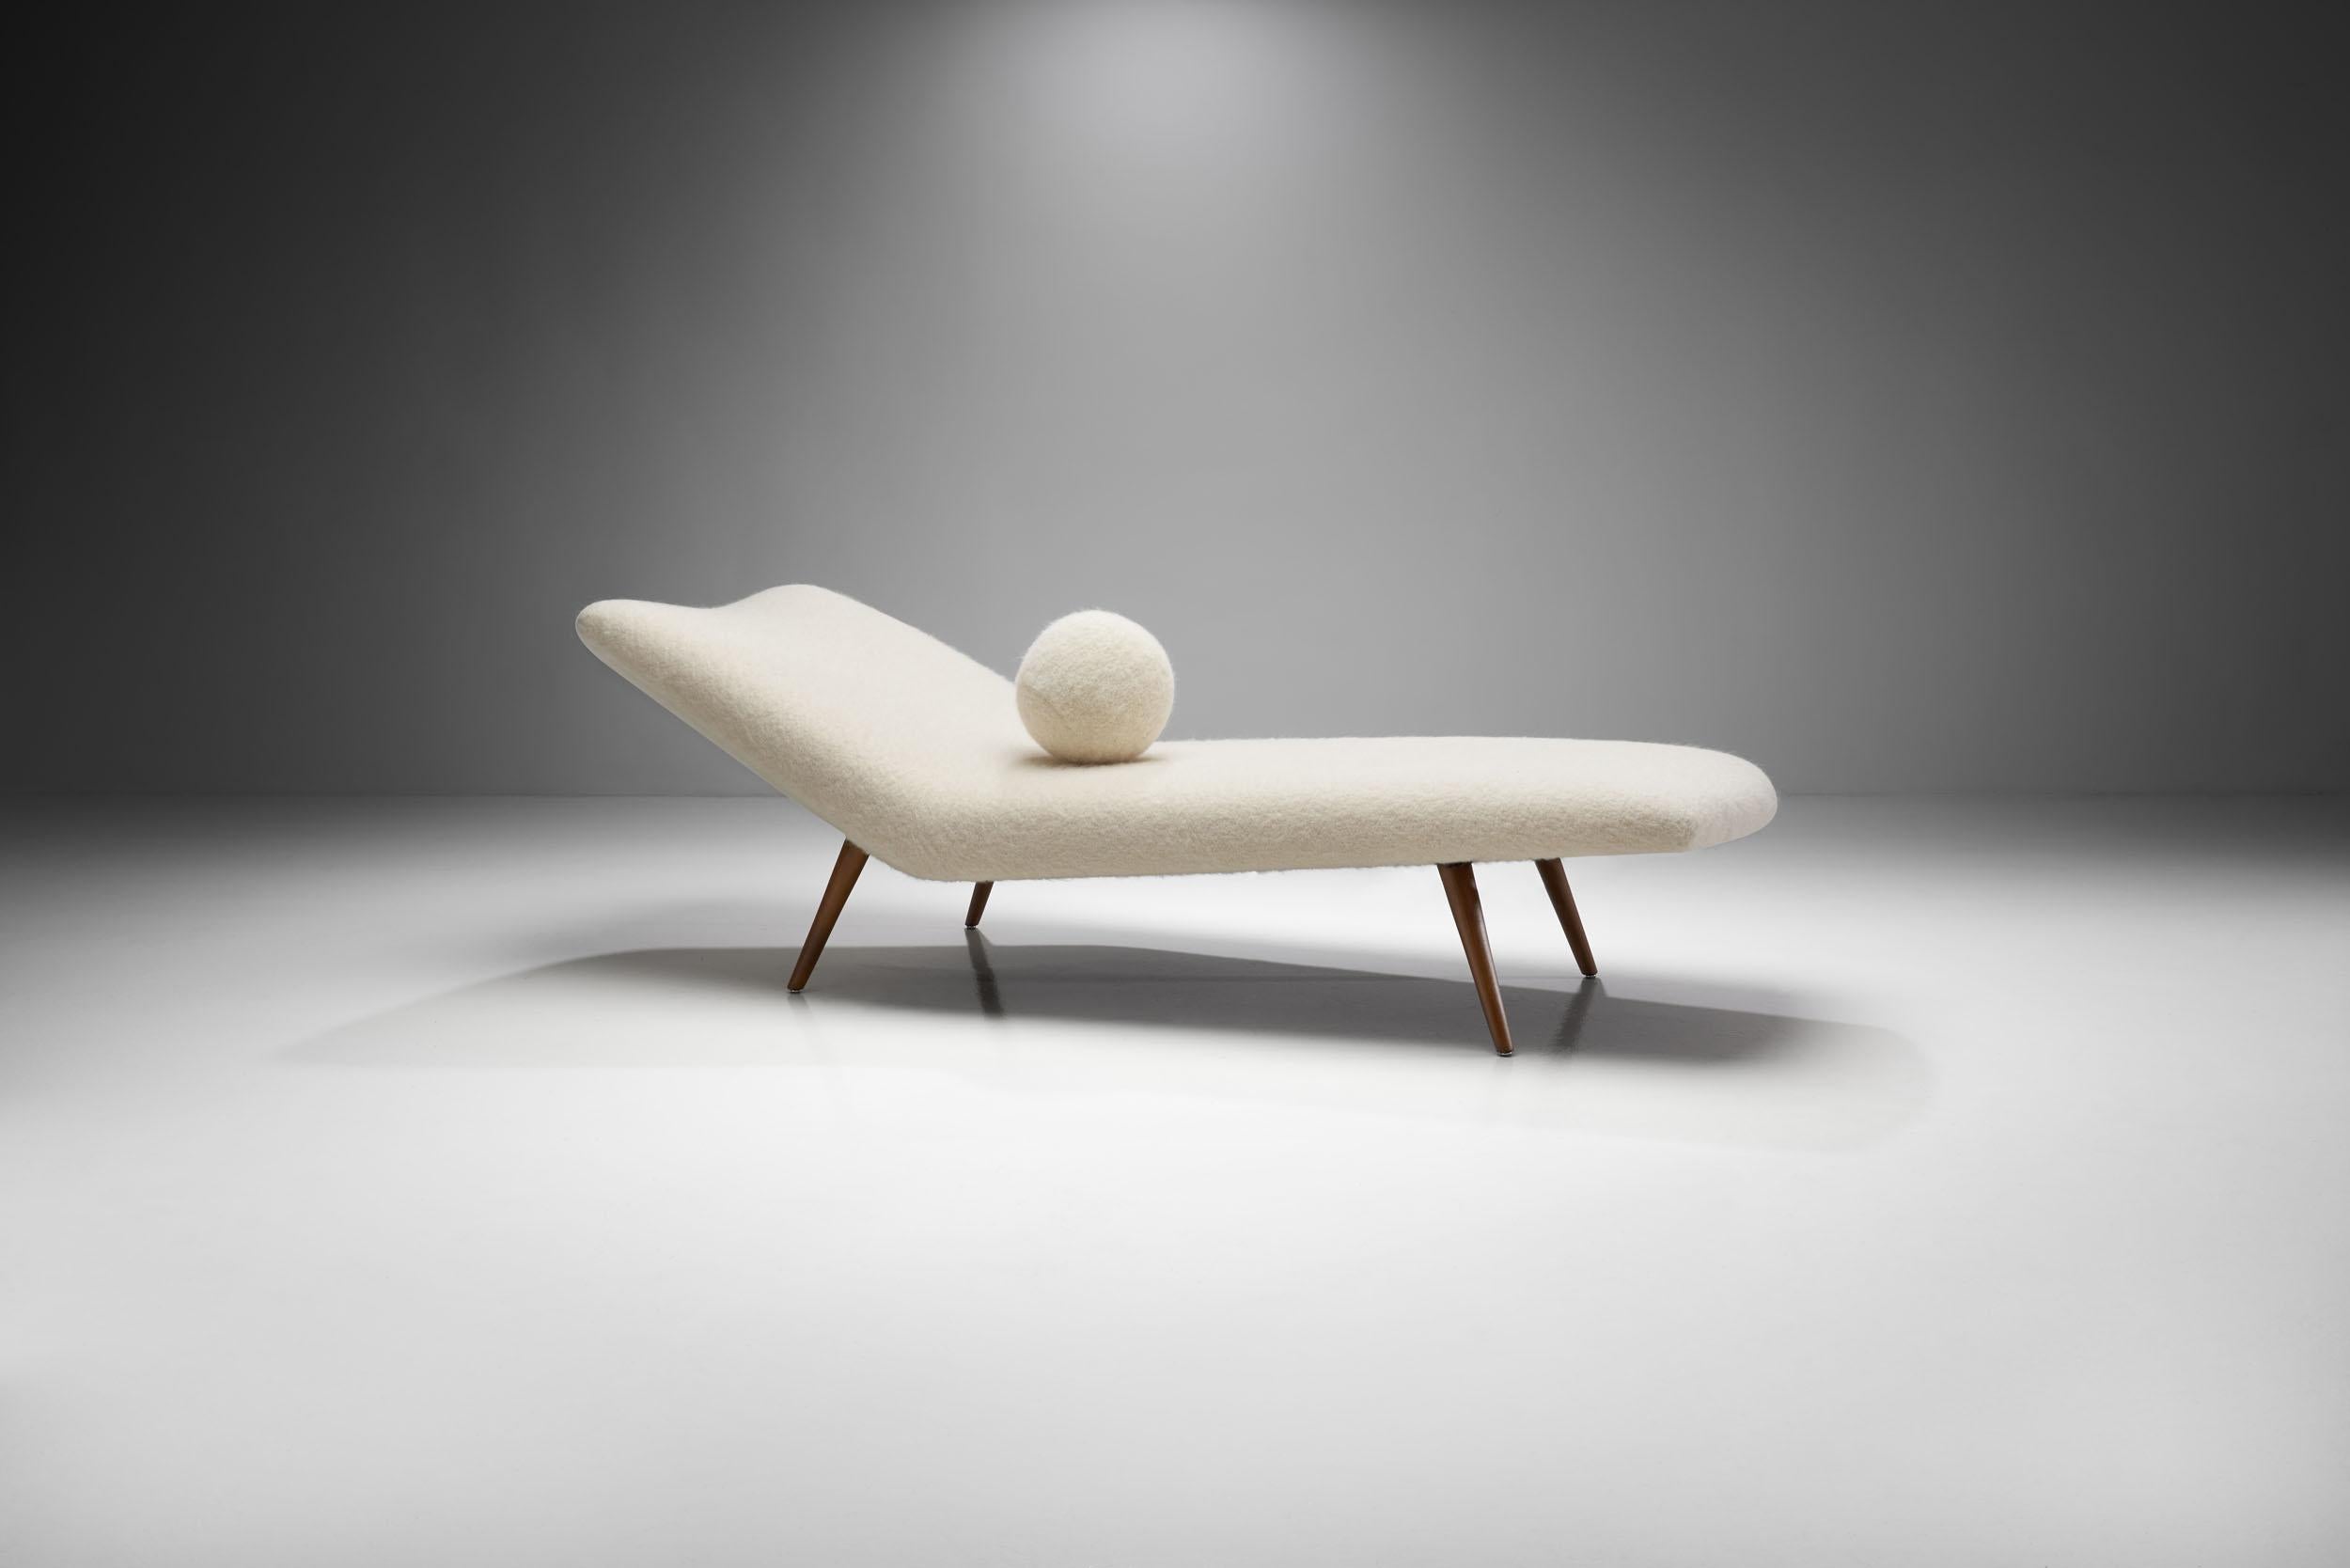 This eye-catching daybed was designed by Theo Ruth in 1947 and manufactured in a limited series. The keywords around this model are quality, comfort and understated elegance.

The slender, slightly conical wooden legs are made from patinated